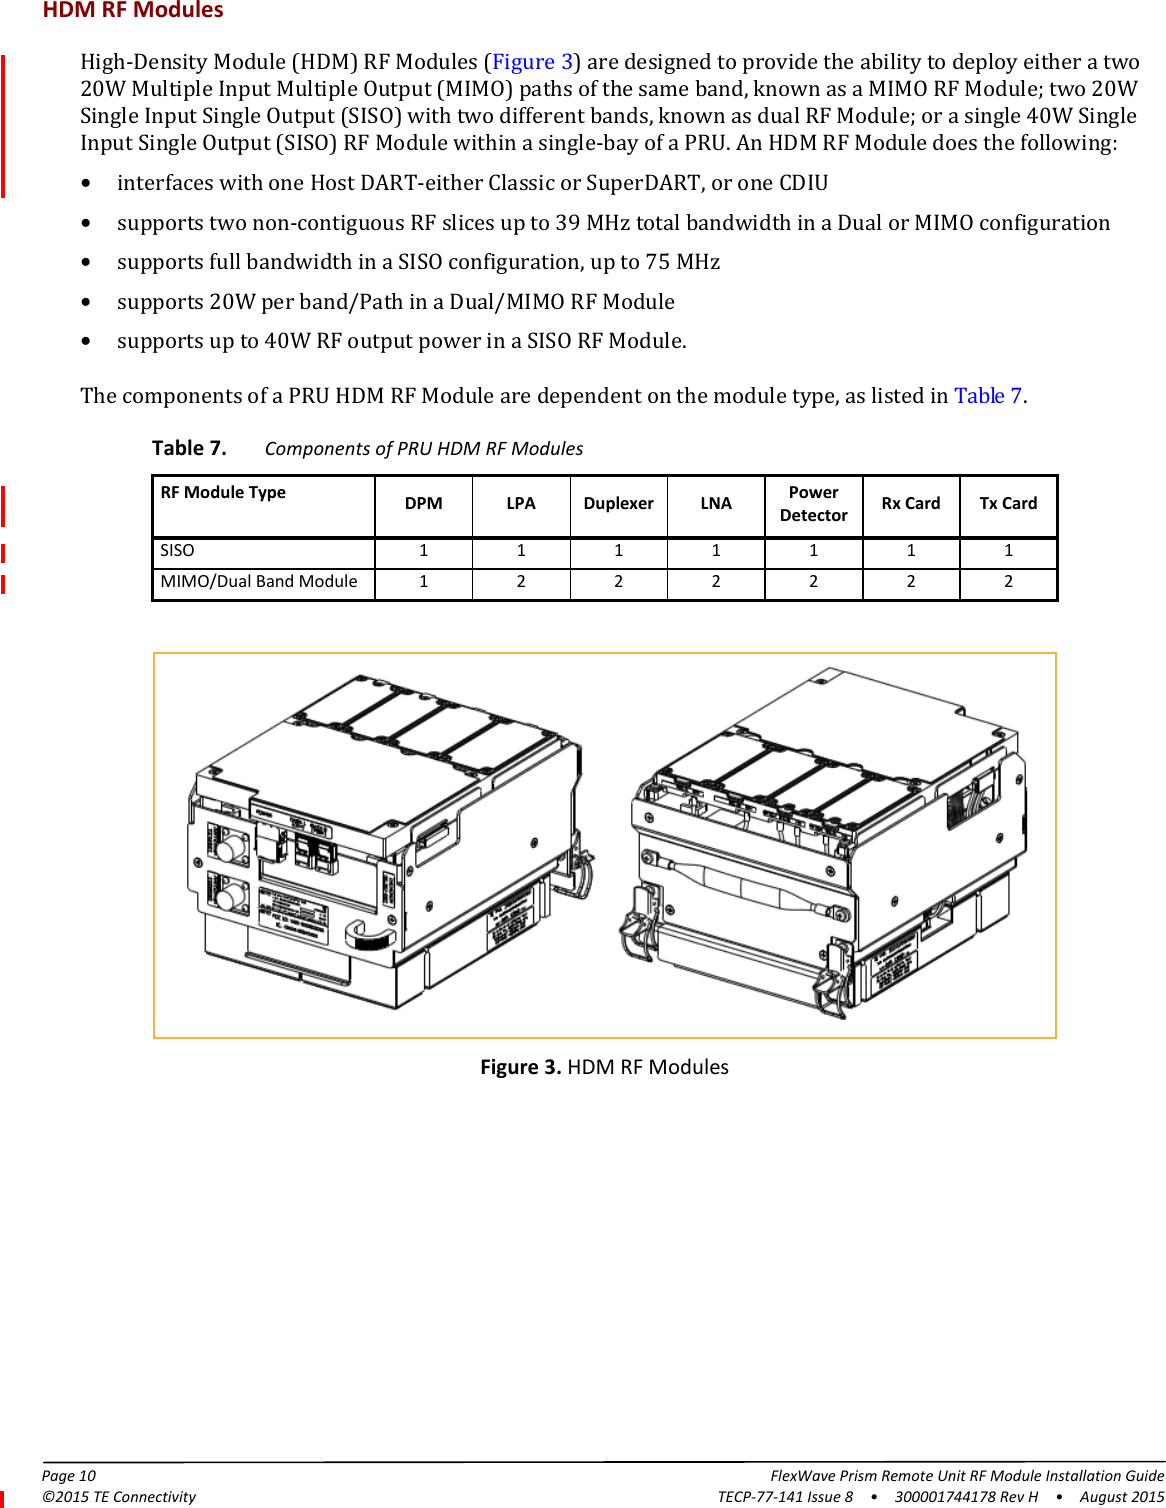 Page 10 FlexWave Prism Remote Unit RF Module Installation Guide©2015 TE Connectivity TECP-77-141 Issue 8  •  300001744178 Rev H  •  August 2015HDM RF ModulesHigh-Density Module (HDM) RF Modules (Figure 3) are designed to provide the ability to deploy either a two 20W Multiple Input Multiple Output (MIMO) paths of the same band, known as a MIMO RF Module; two 20W Single Input Single Output (SISO) with two different bands, known as dual RF Module; or a single 40W Single Input Single Output (SISO) RF Module within a single-bay of a PRU. An HDM RF Module does the following:•interfaces with one Host DART-either Classic or SuperDART, or one CDIU•supports two non-contiguous RF slices up to 39 MHz total bandwidth in a Dual or MIMO configuration•supports full bandwidth in a SISO configuration, up to 75 MHz•supports 20W per band/Path in a Dual/MIMO RF Module•supports up to 40W RF output power in a SISO RF Module.The components of a PRU HDM RF Module are dependent on the module type, as listed in Table 7.Table 7. Components of PRU HDM RF ModulesRF Module Type DPM LPA Duplexer LNA Power Detector Rx Card Tx CardSISO 1111111MIMO/Dual Band Module 1222222Figure 3. HDM RF Modules